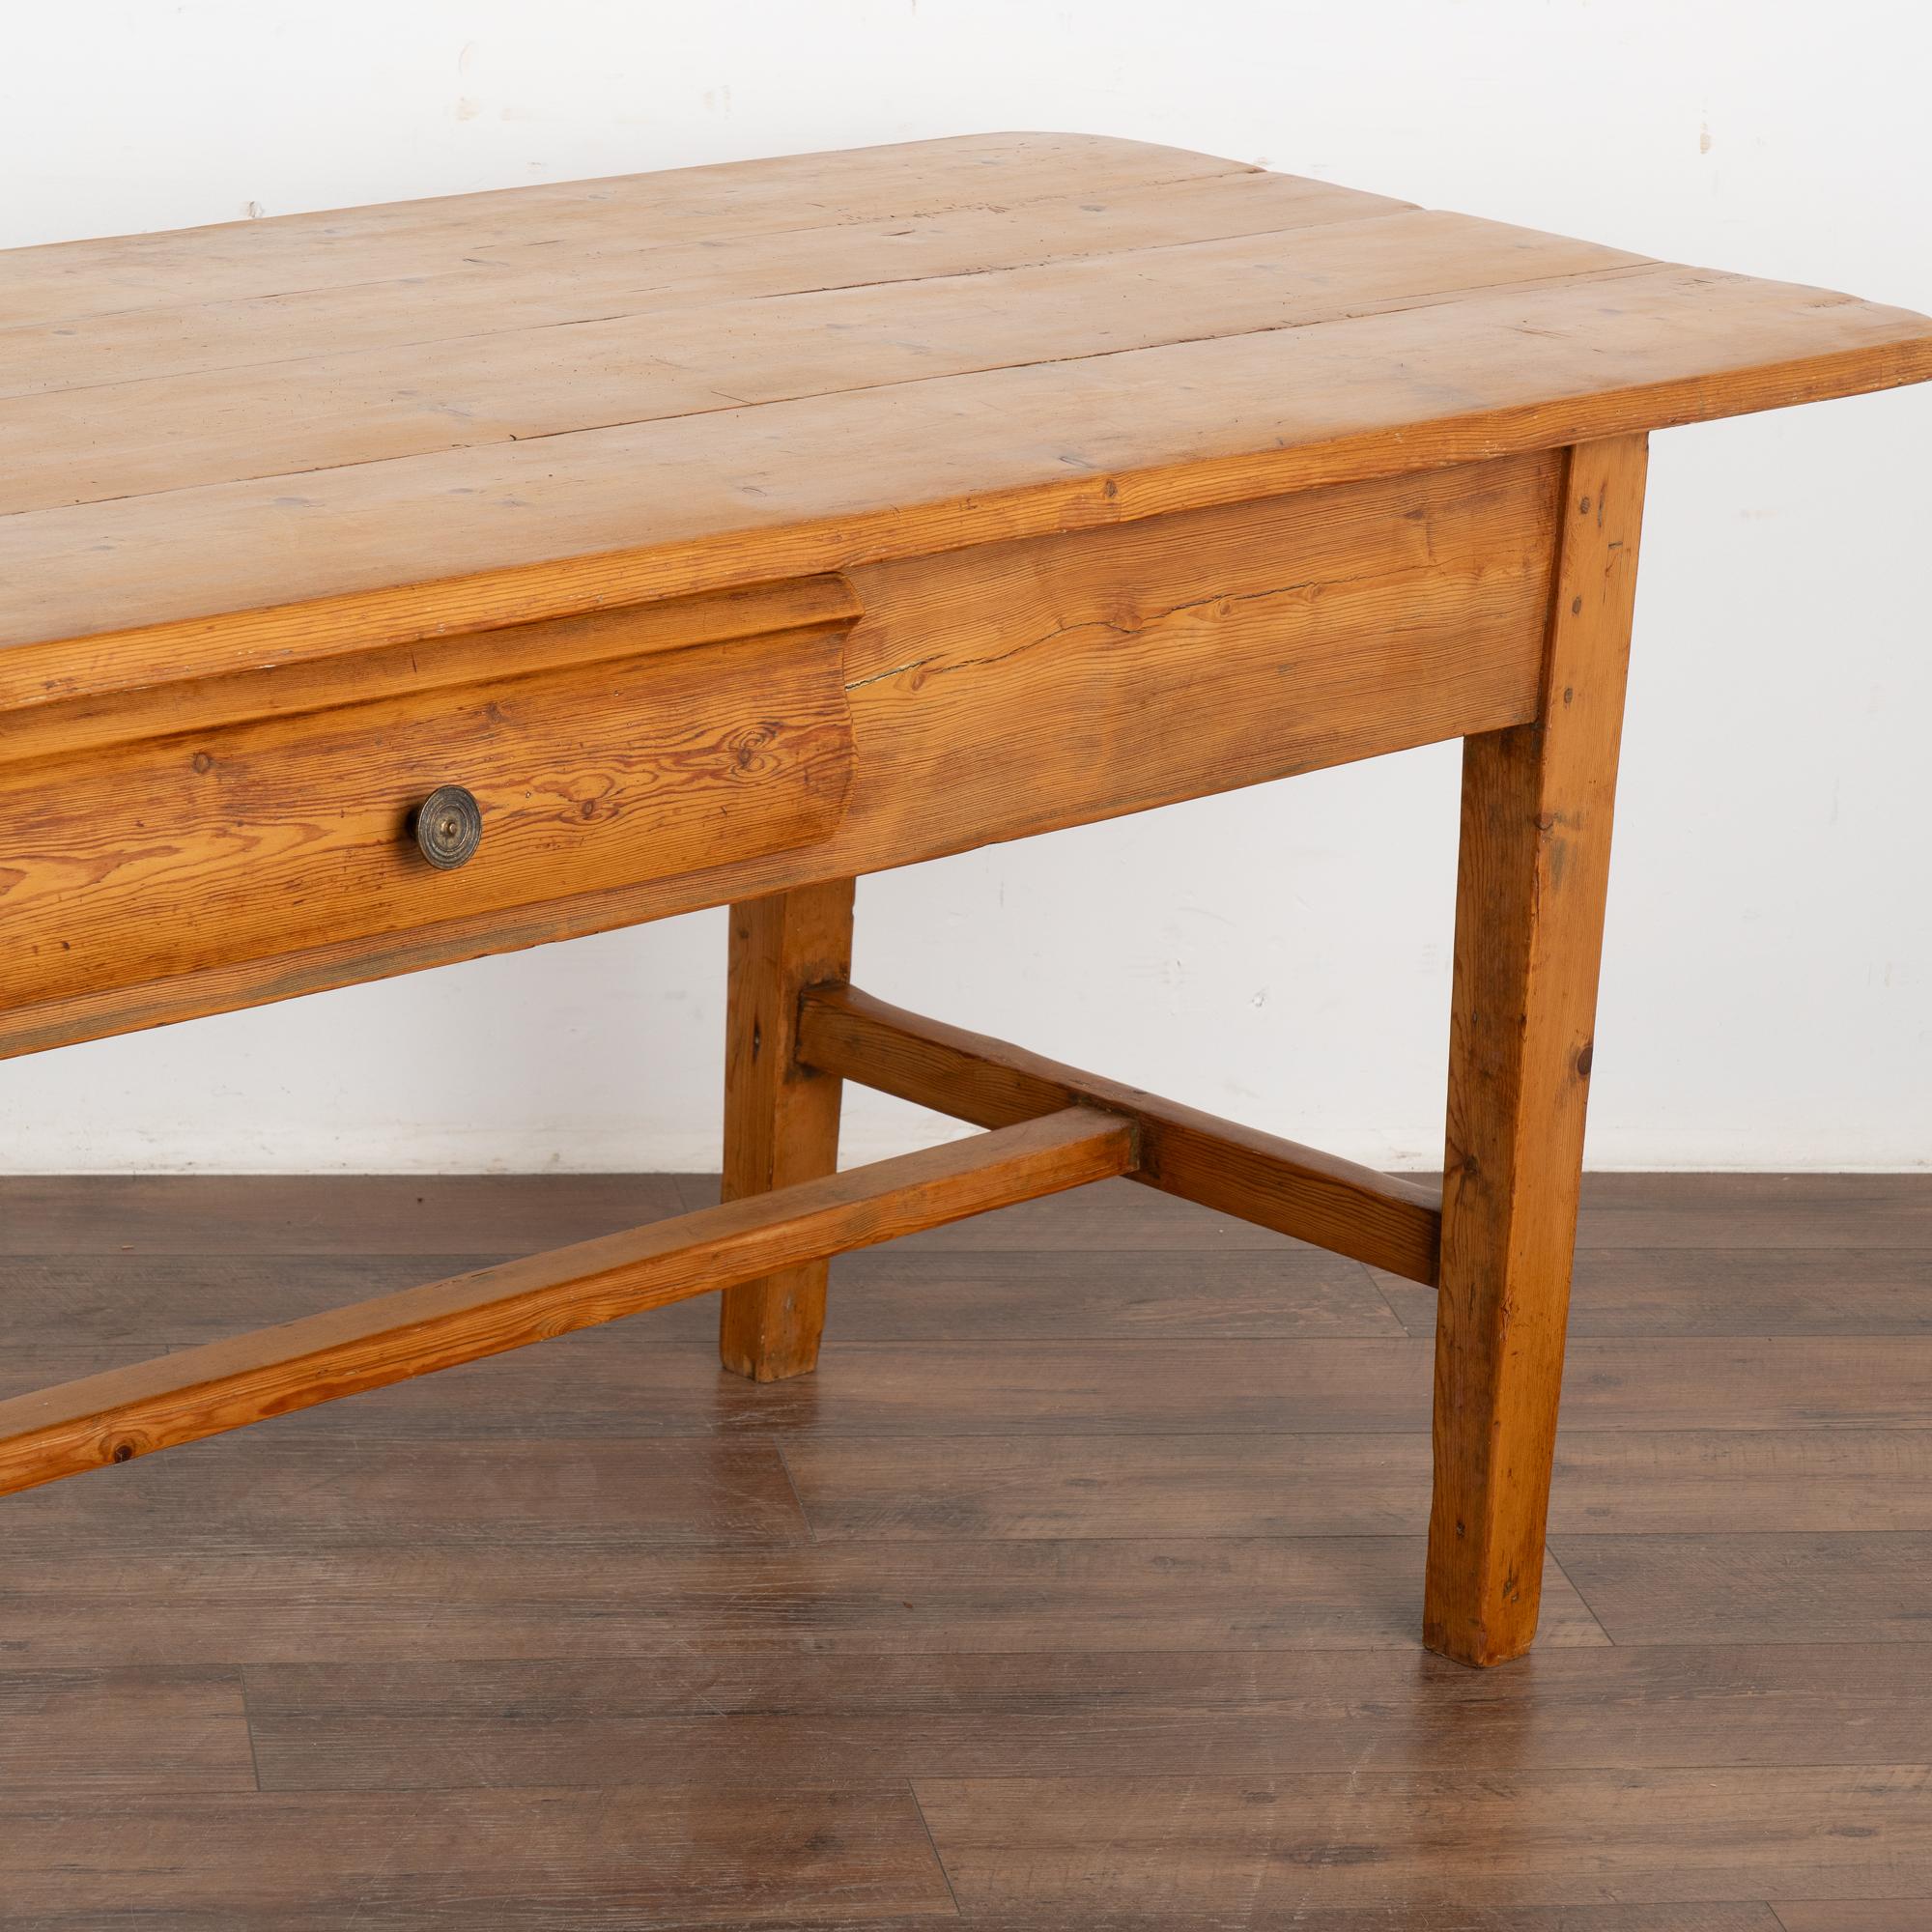 19th Century Pine Farm Table With Single Drawer, Sweden circa 1840 For Sale